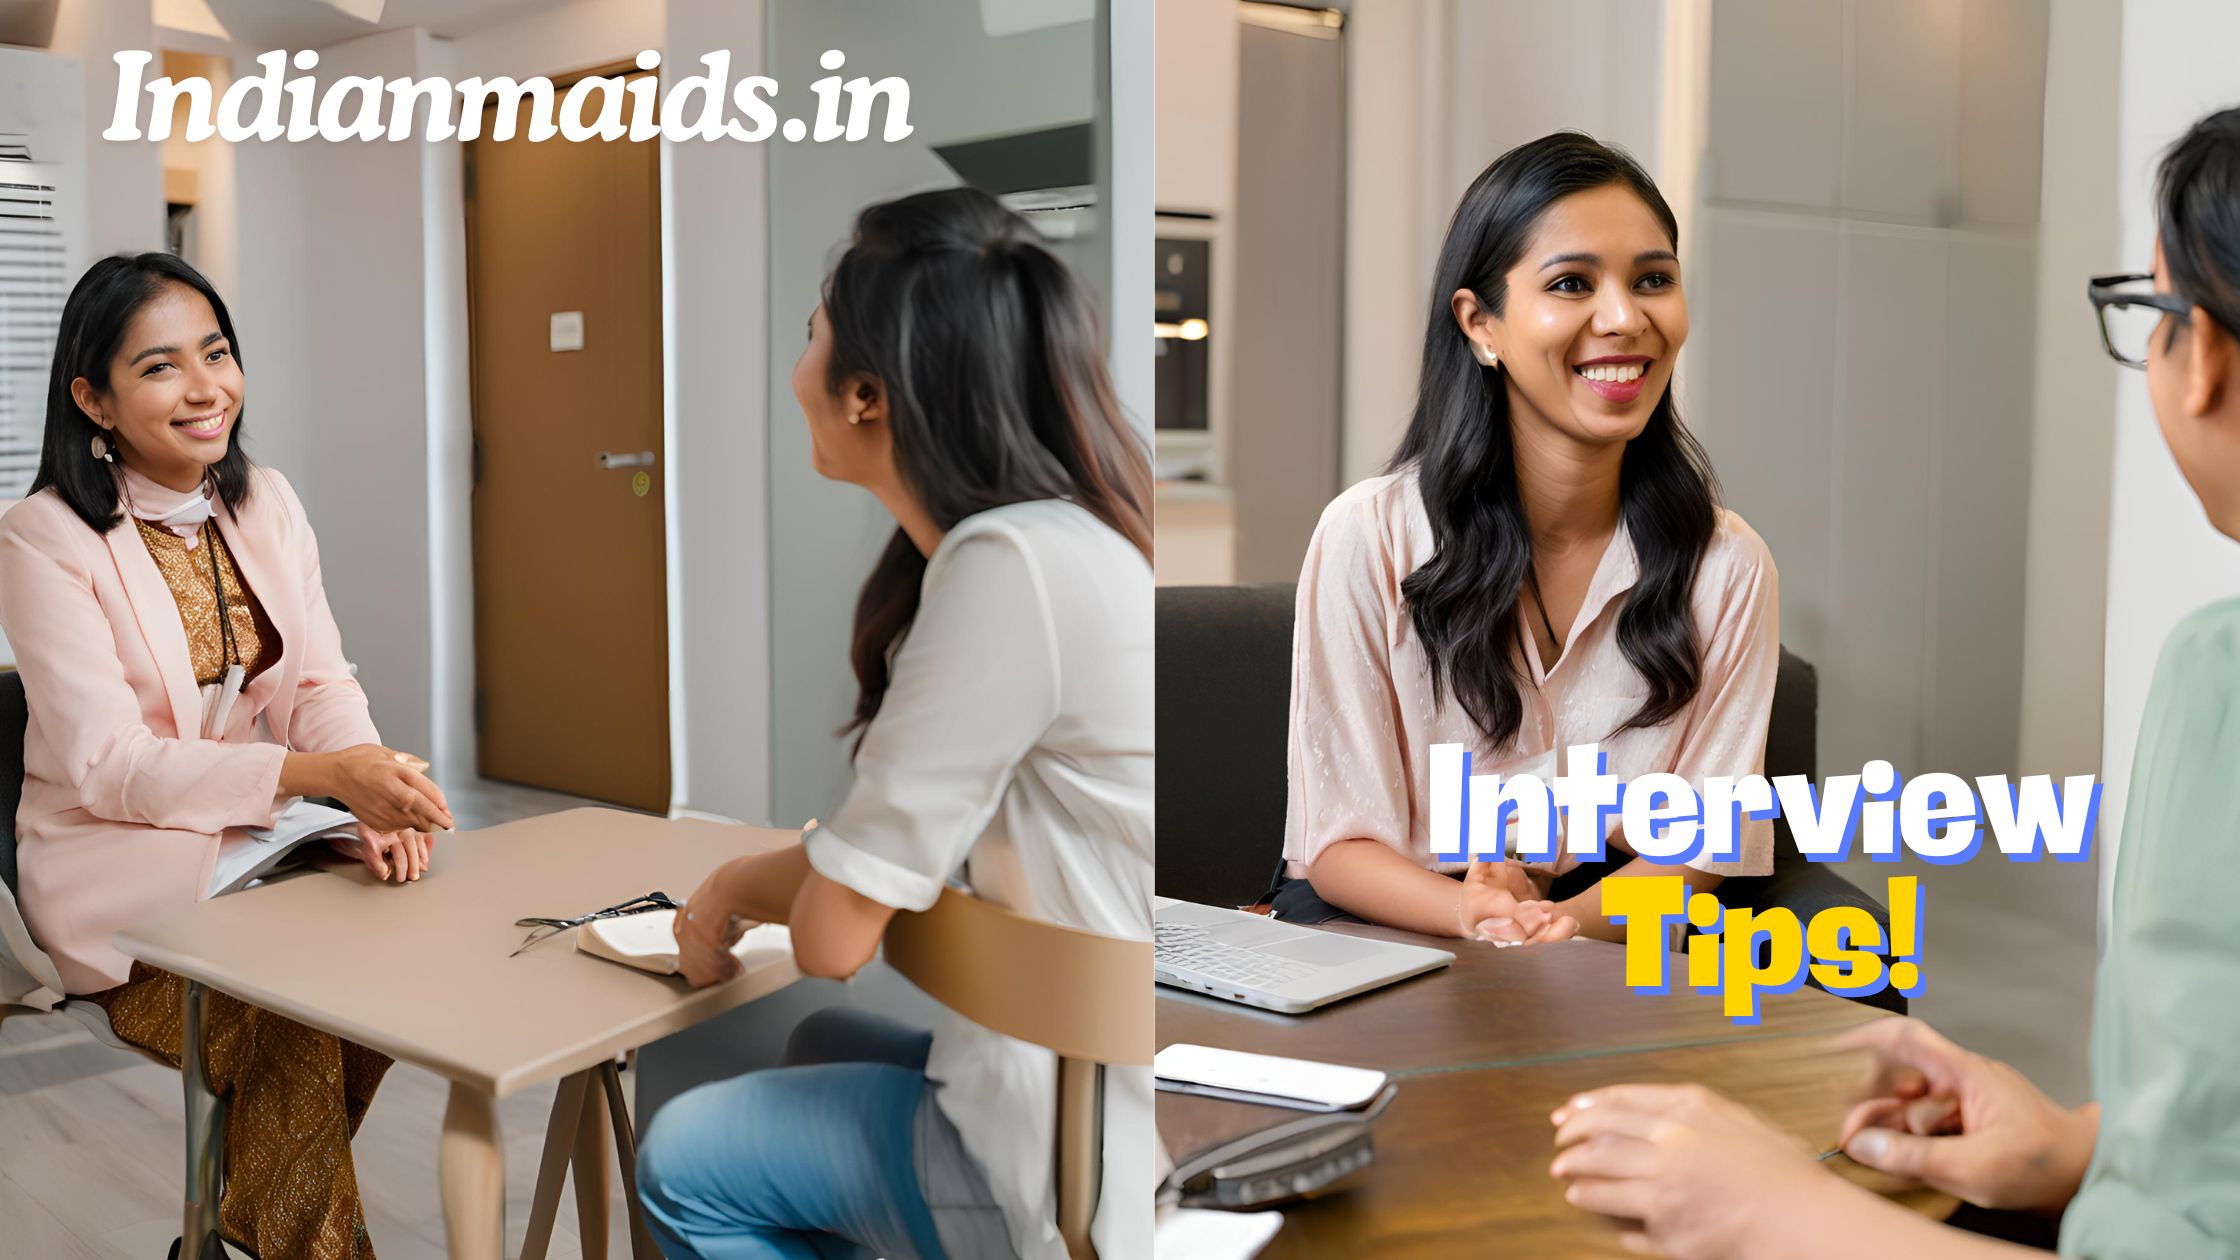 Tips for Conducting a Successful Interview with an Indian Helper post thumbnail image